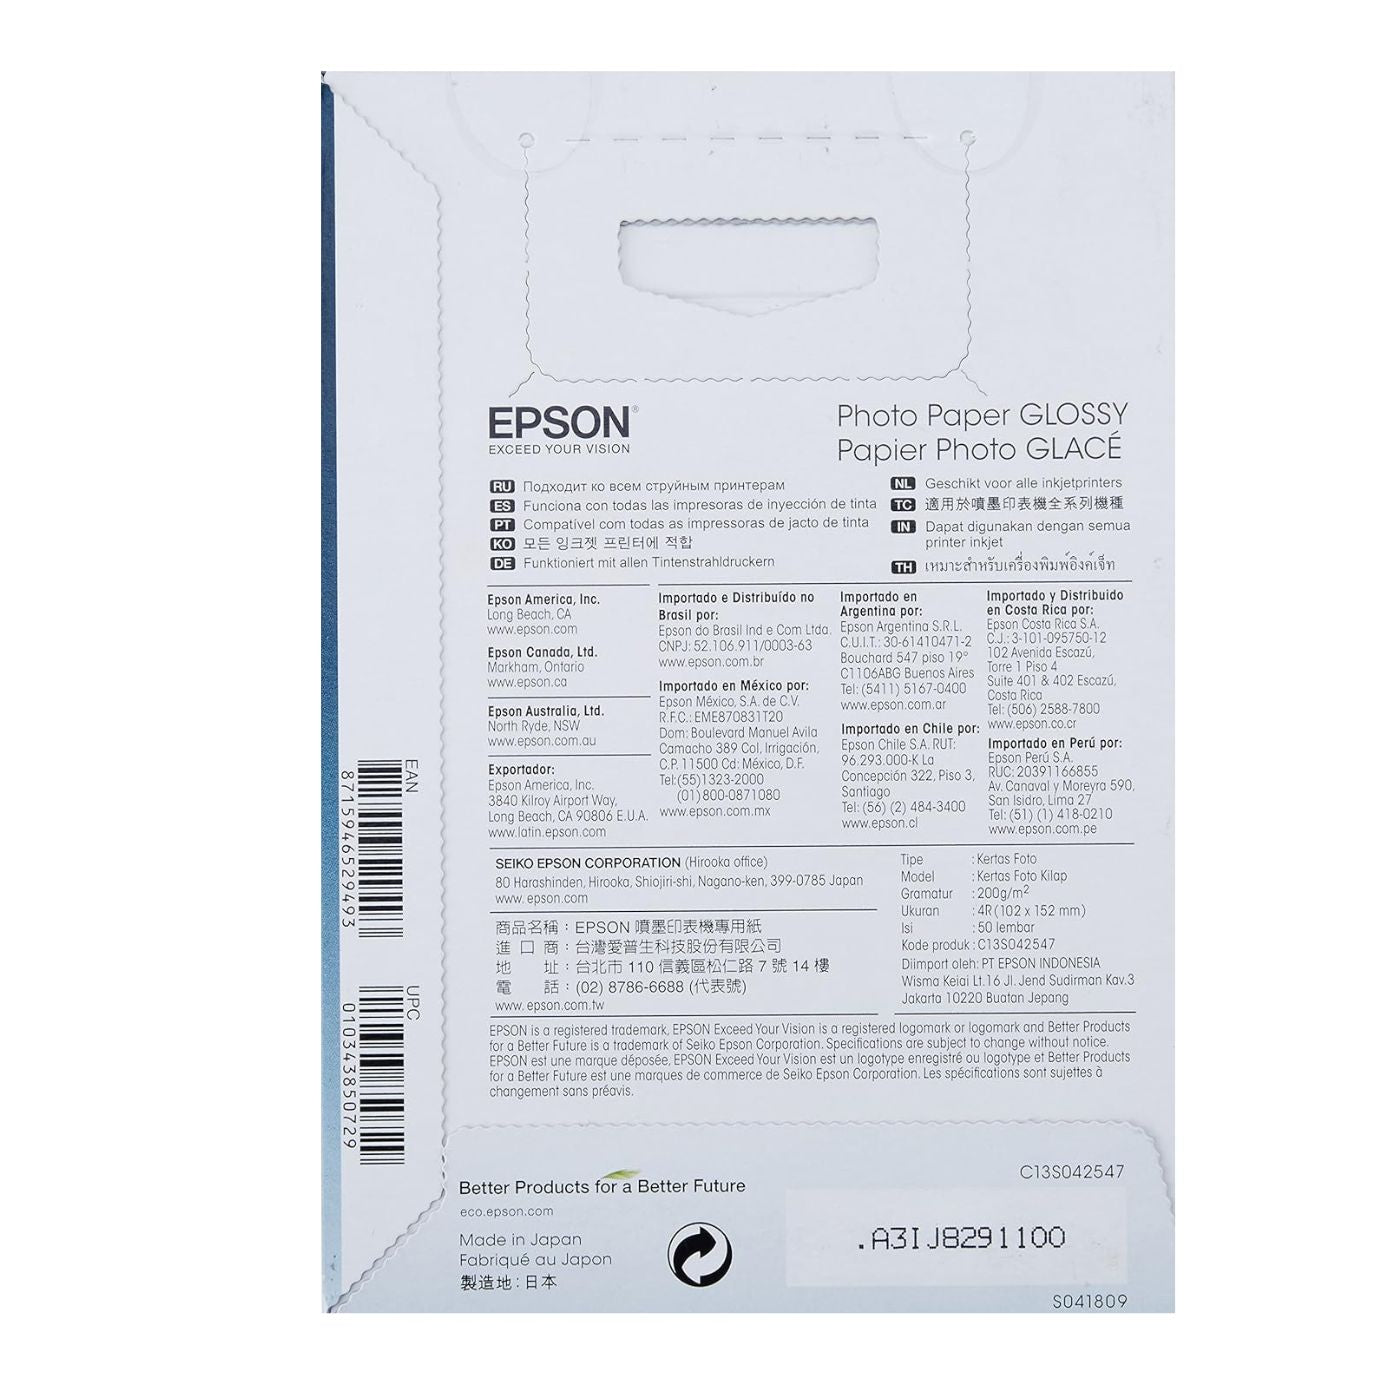 Epson 42548 Photo Paper Glossy 4" x 6" 200gsm 100 sheets